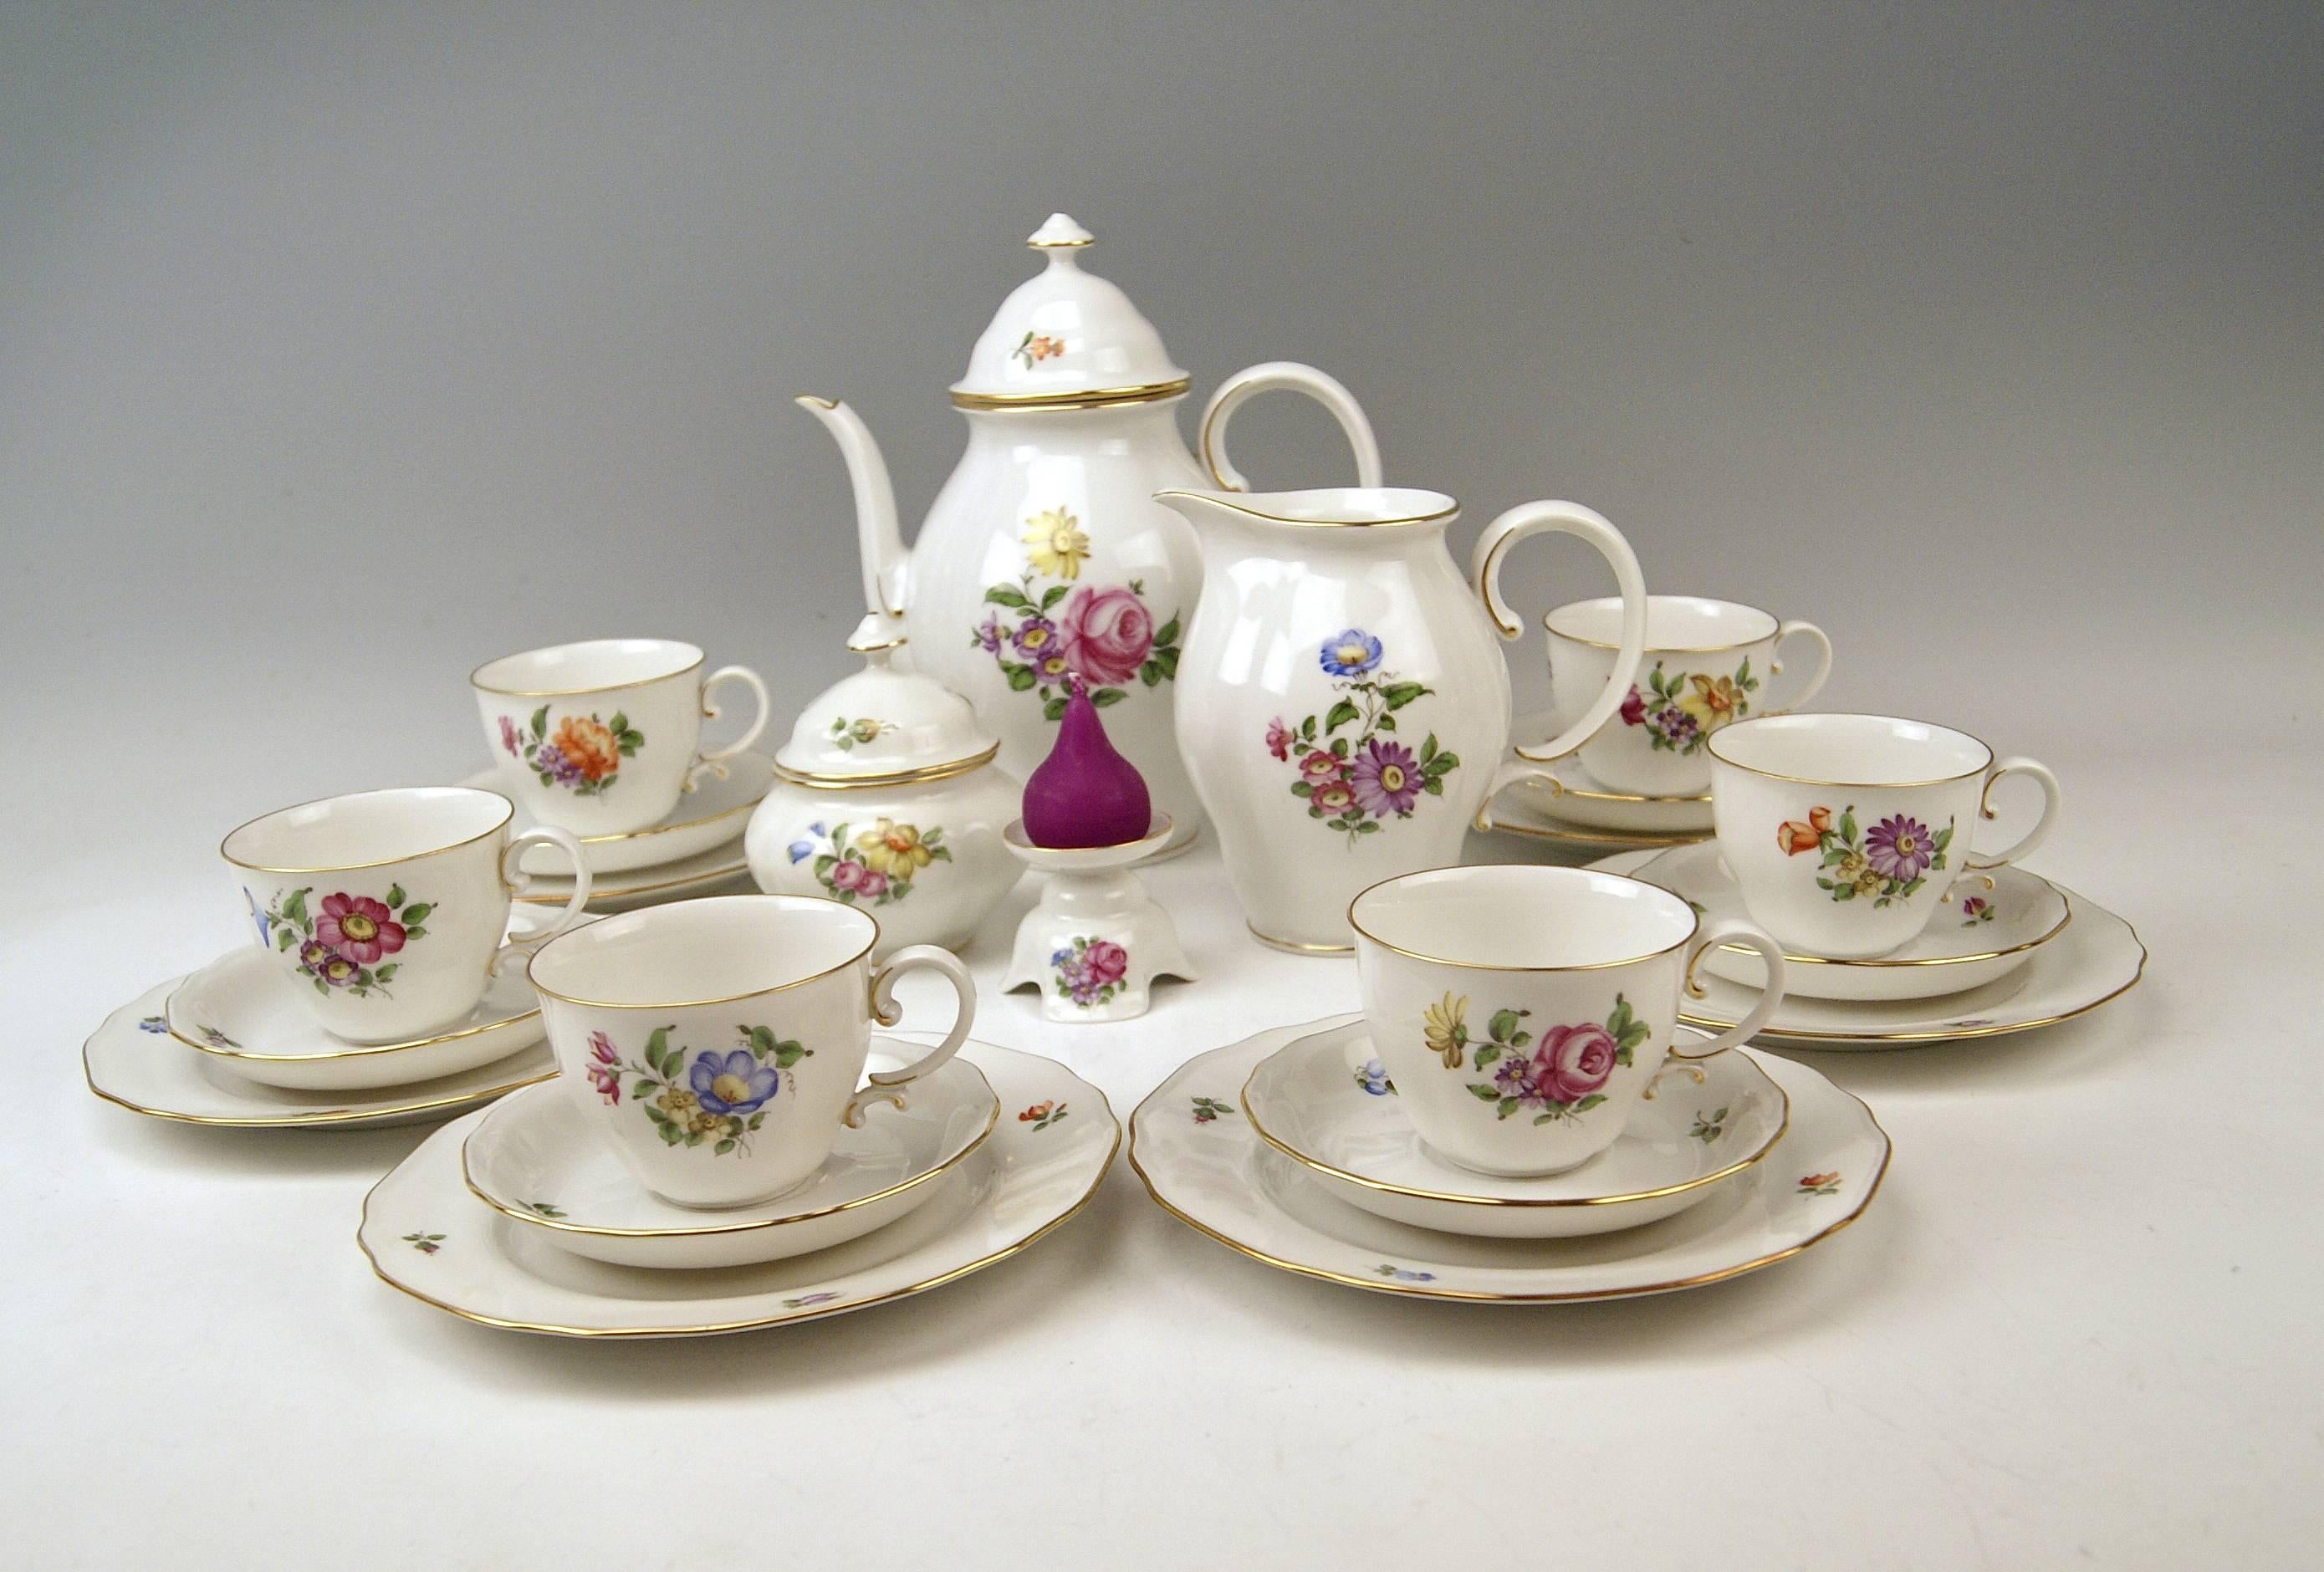 We invite you here to look at a splendid as well as nicest Augarten Vienna coffee set for six persons: 

This Viennese Augarten coffee set is of finest elegance due to its delicate multicolored paintings depicting various flower's blossoms with